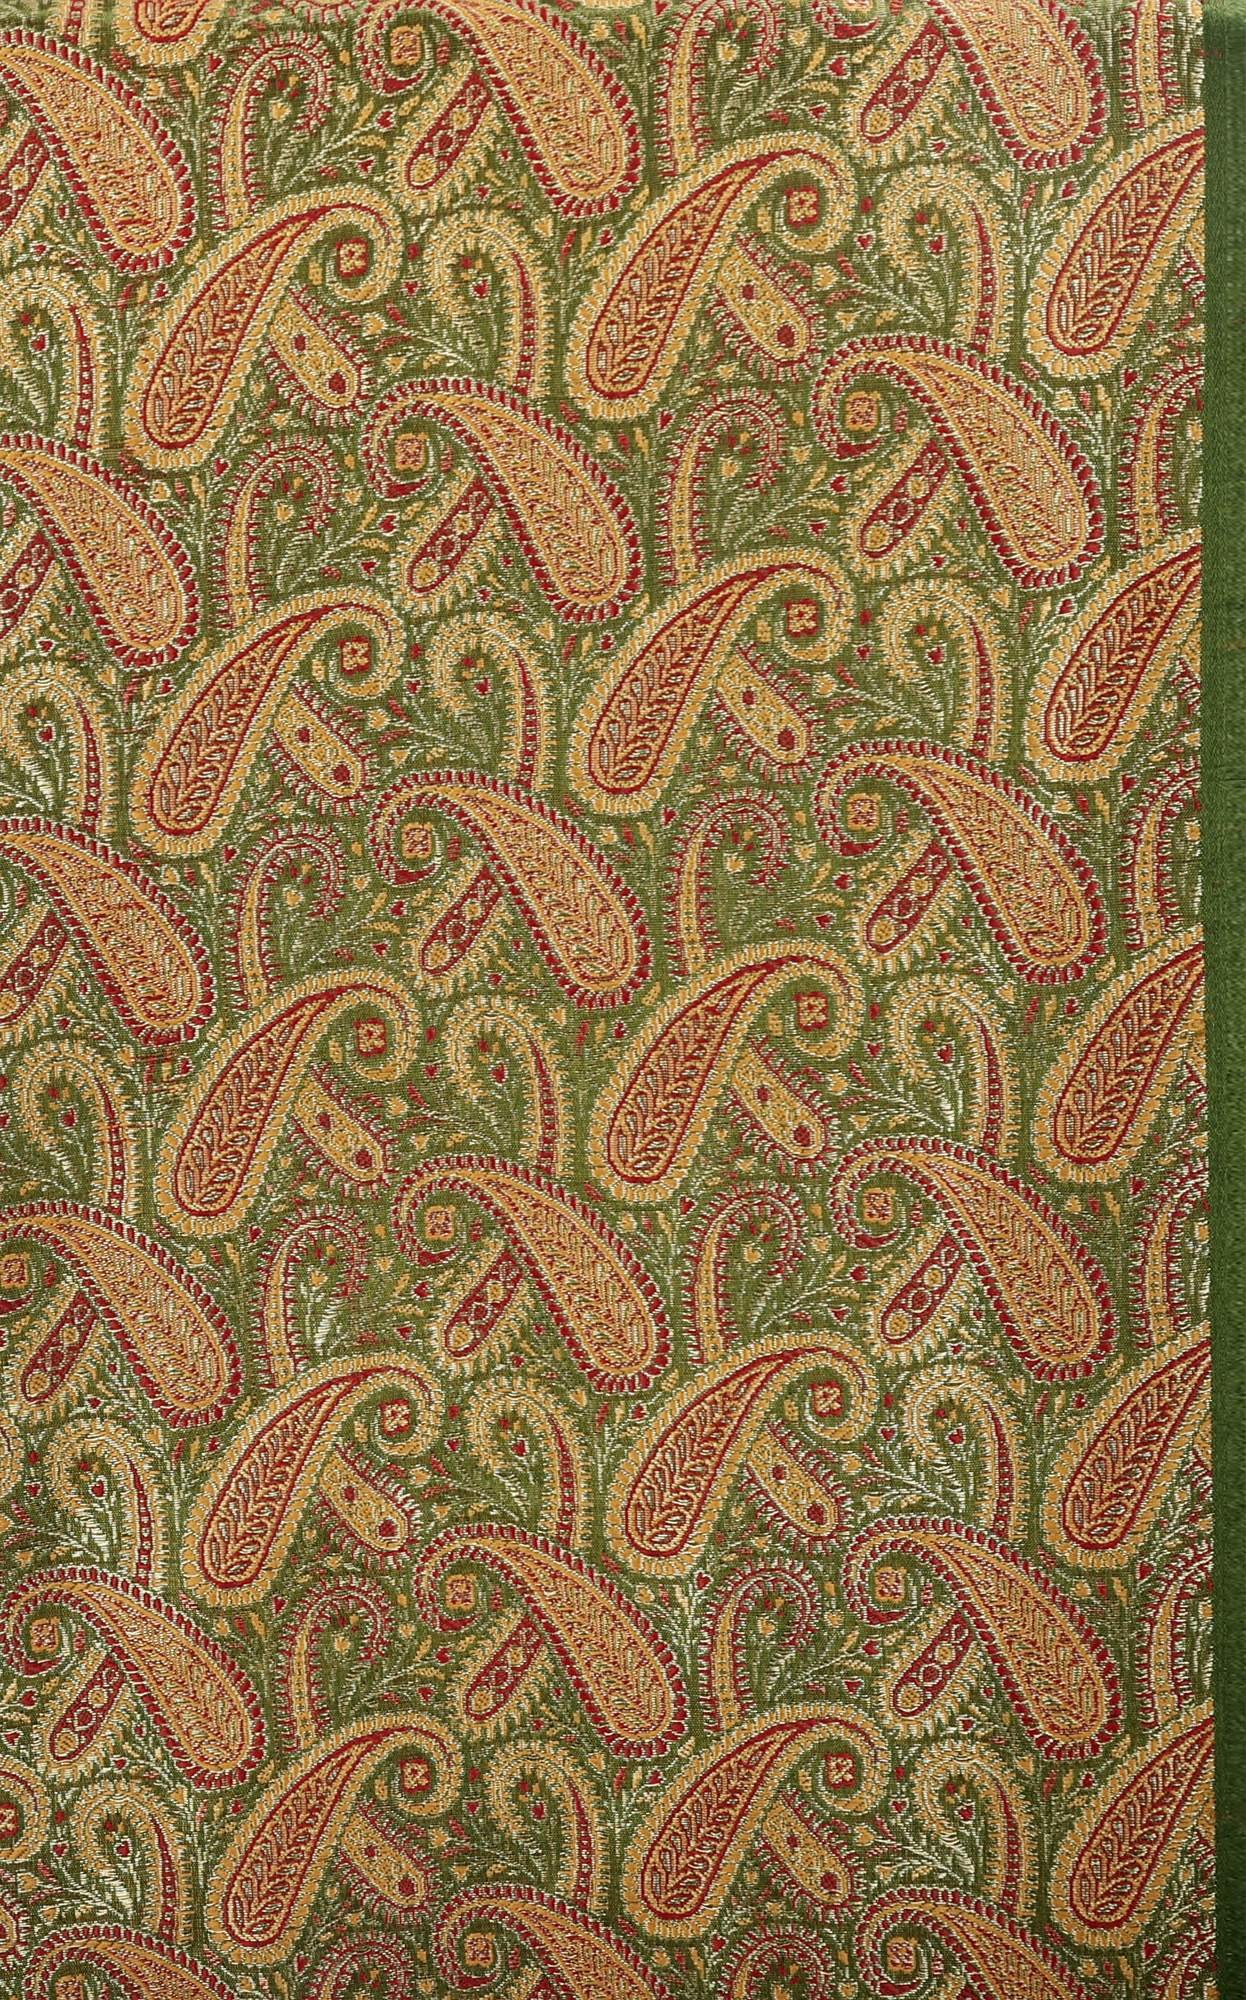 Green Fabric from Banaras with Paisleys Woven in Golden Thread | Exotic ...